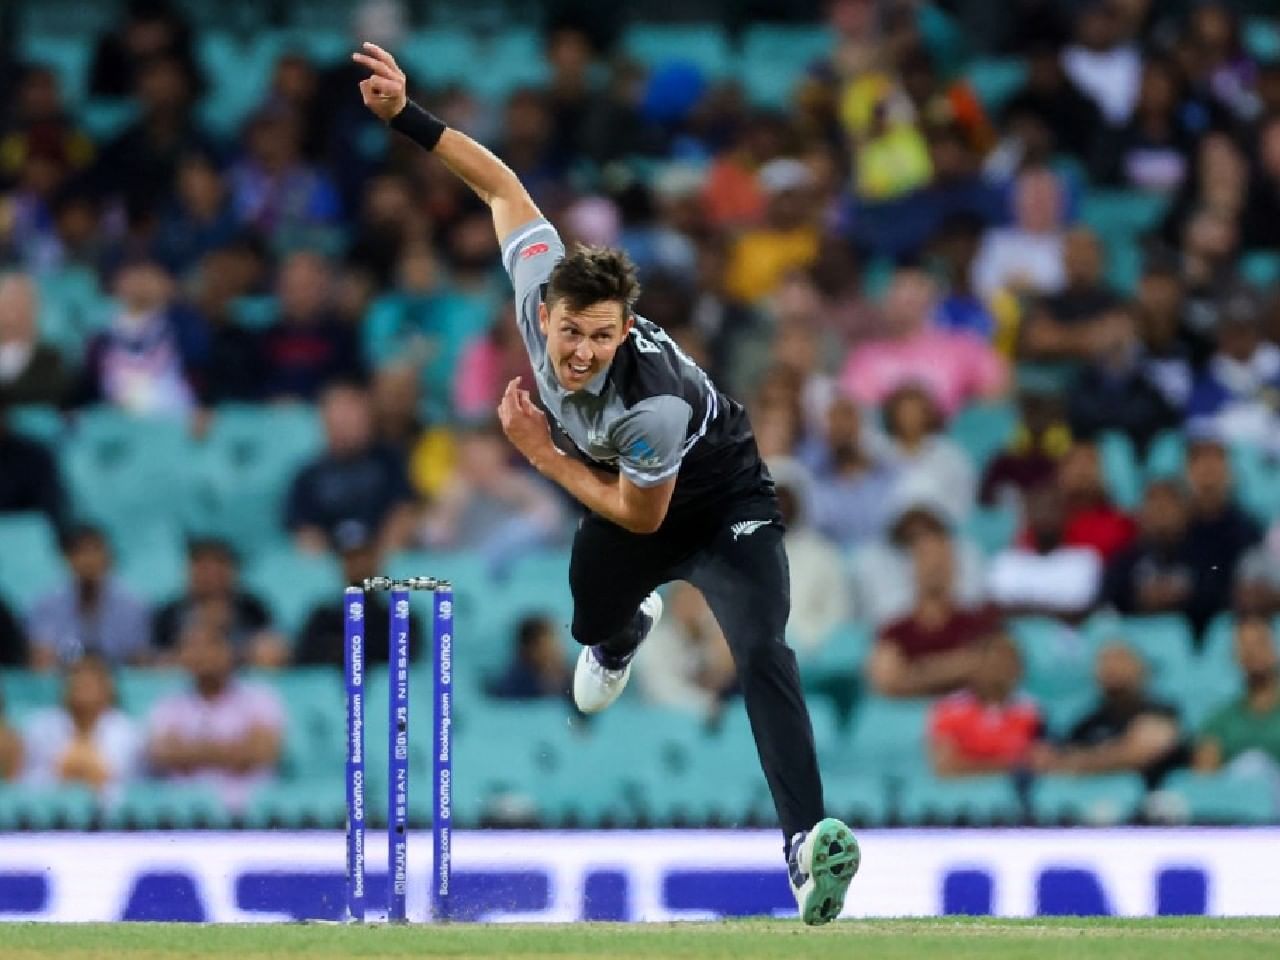 Still got big desire to play in ODI World Cup, says New Zealand pacer Trent Boult